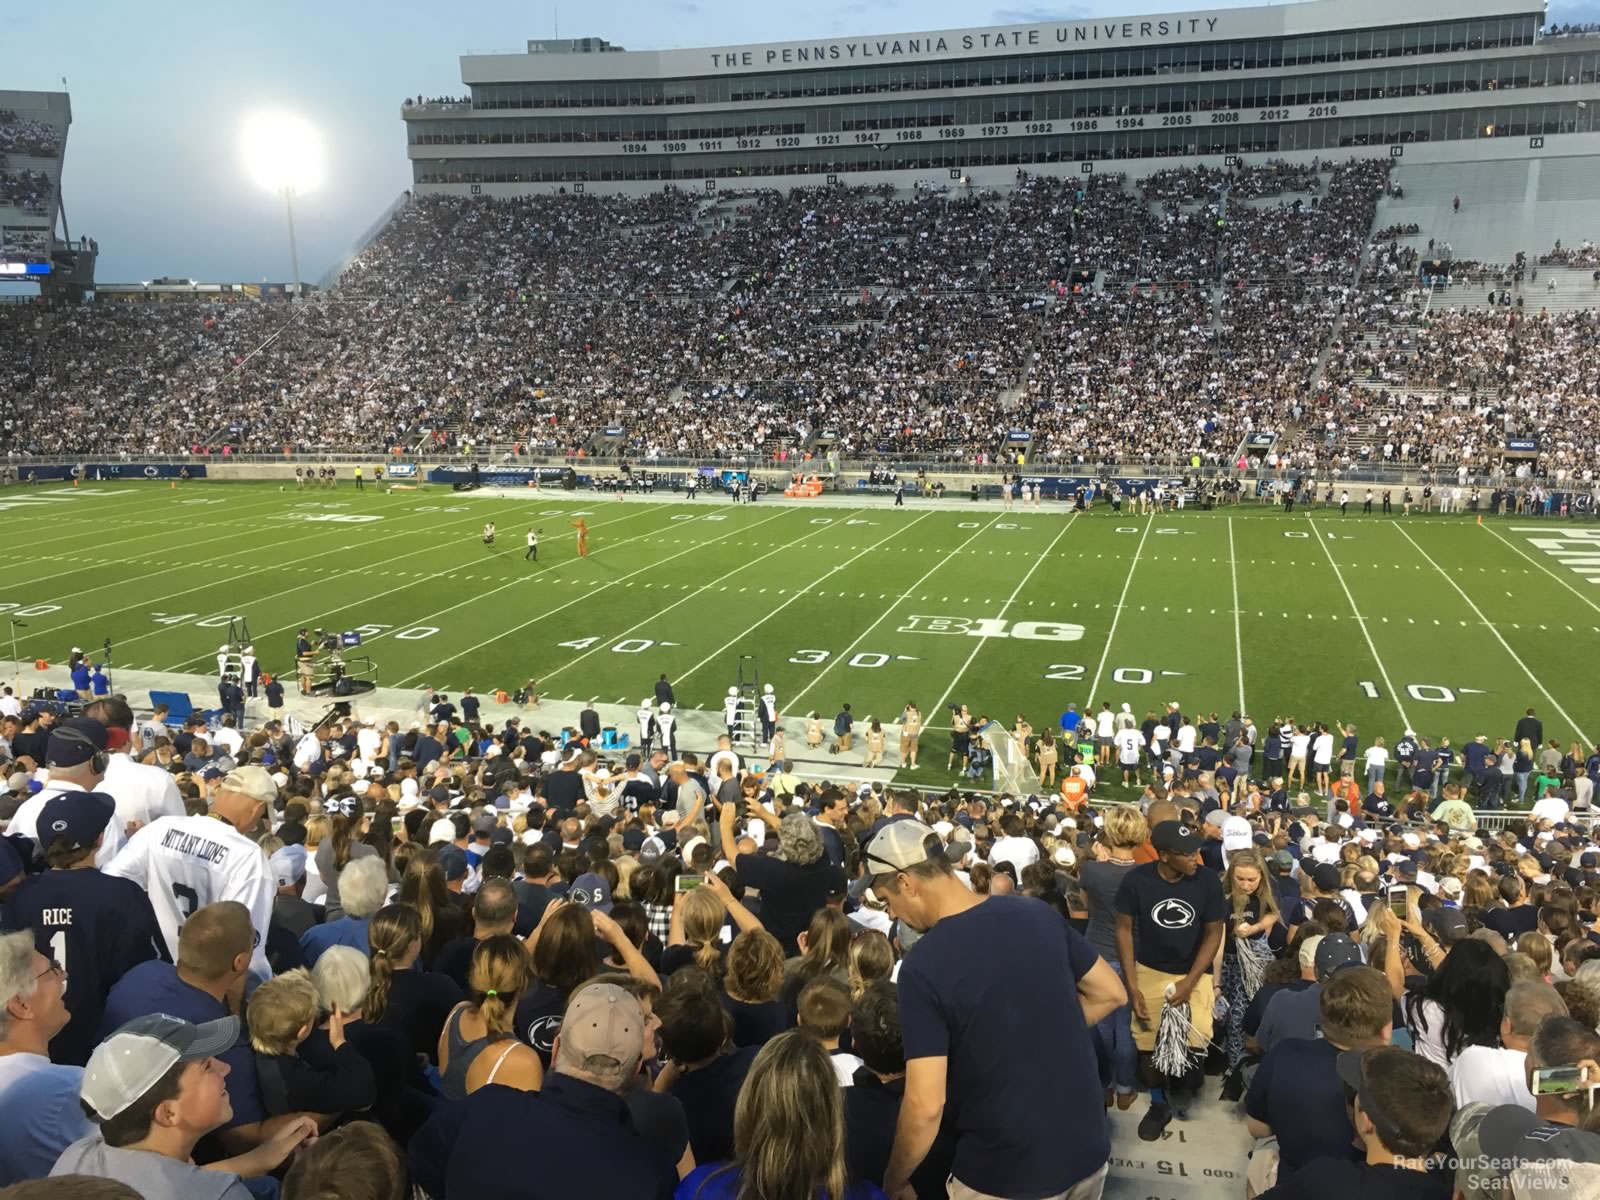 section wc, row 25 seat view  - beaver stadium